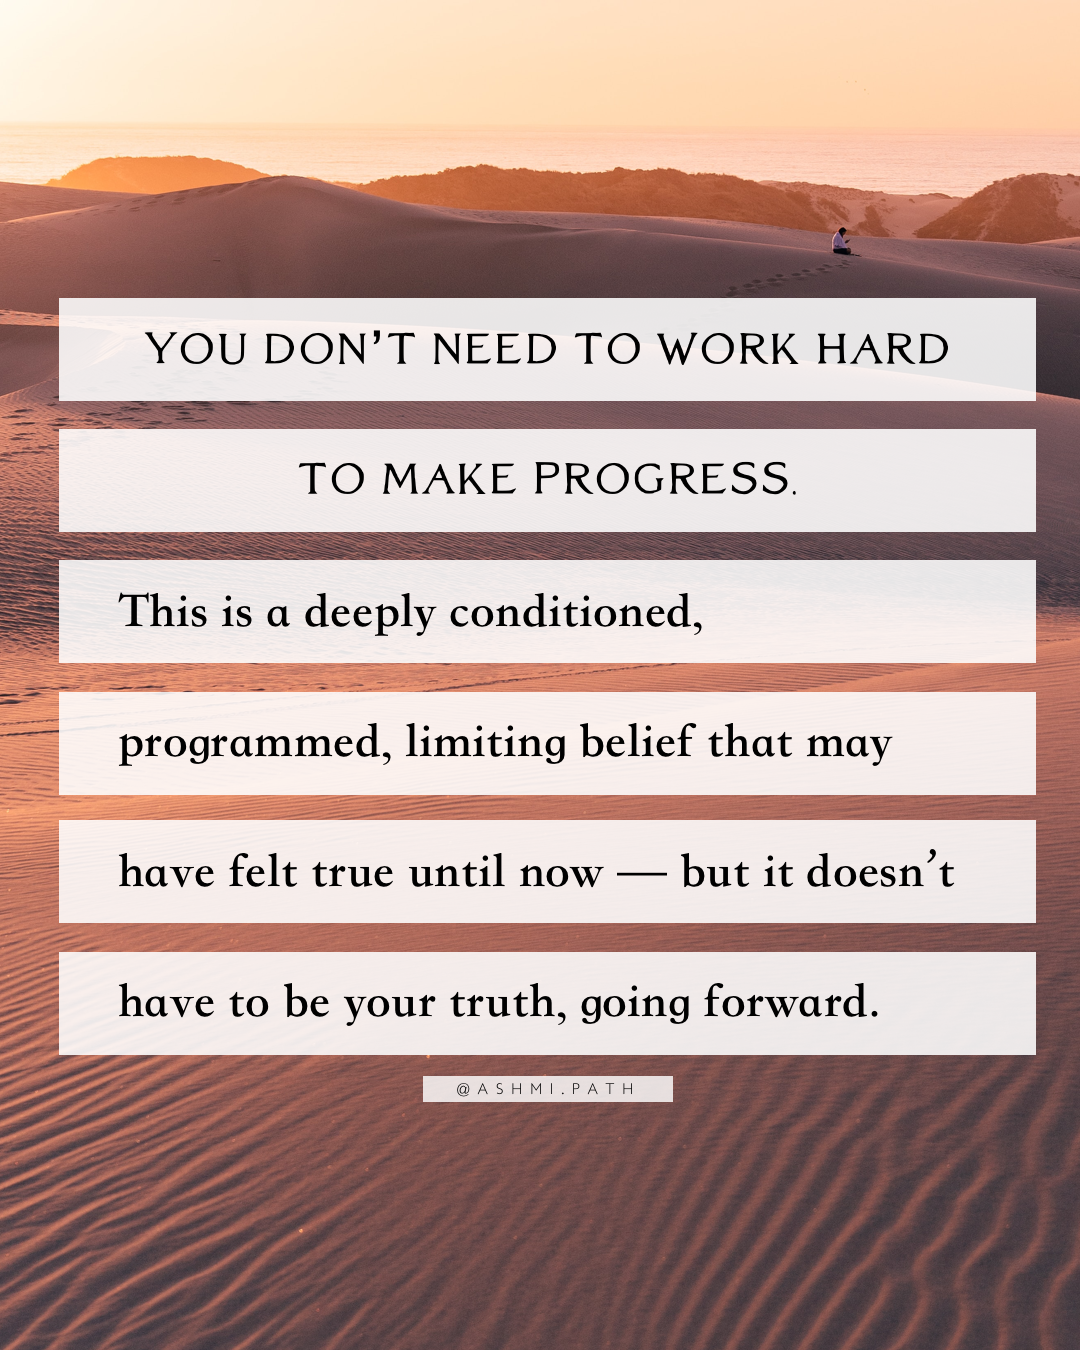 You Don't Need to Work Hard to Make Progress - A New Way